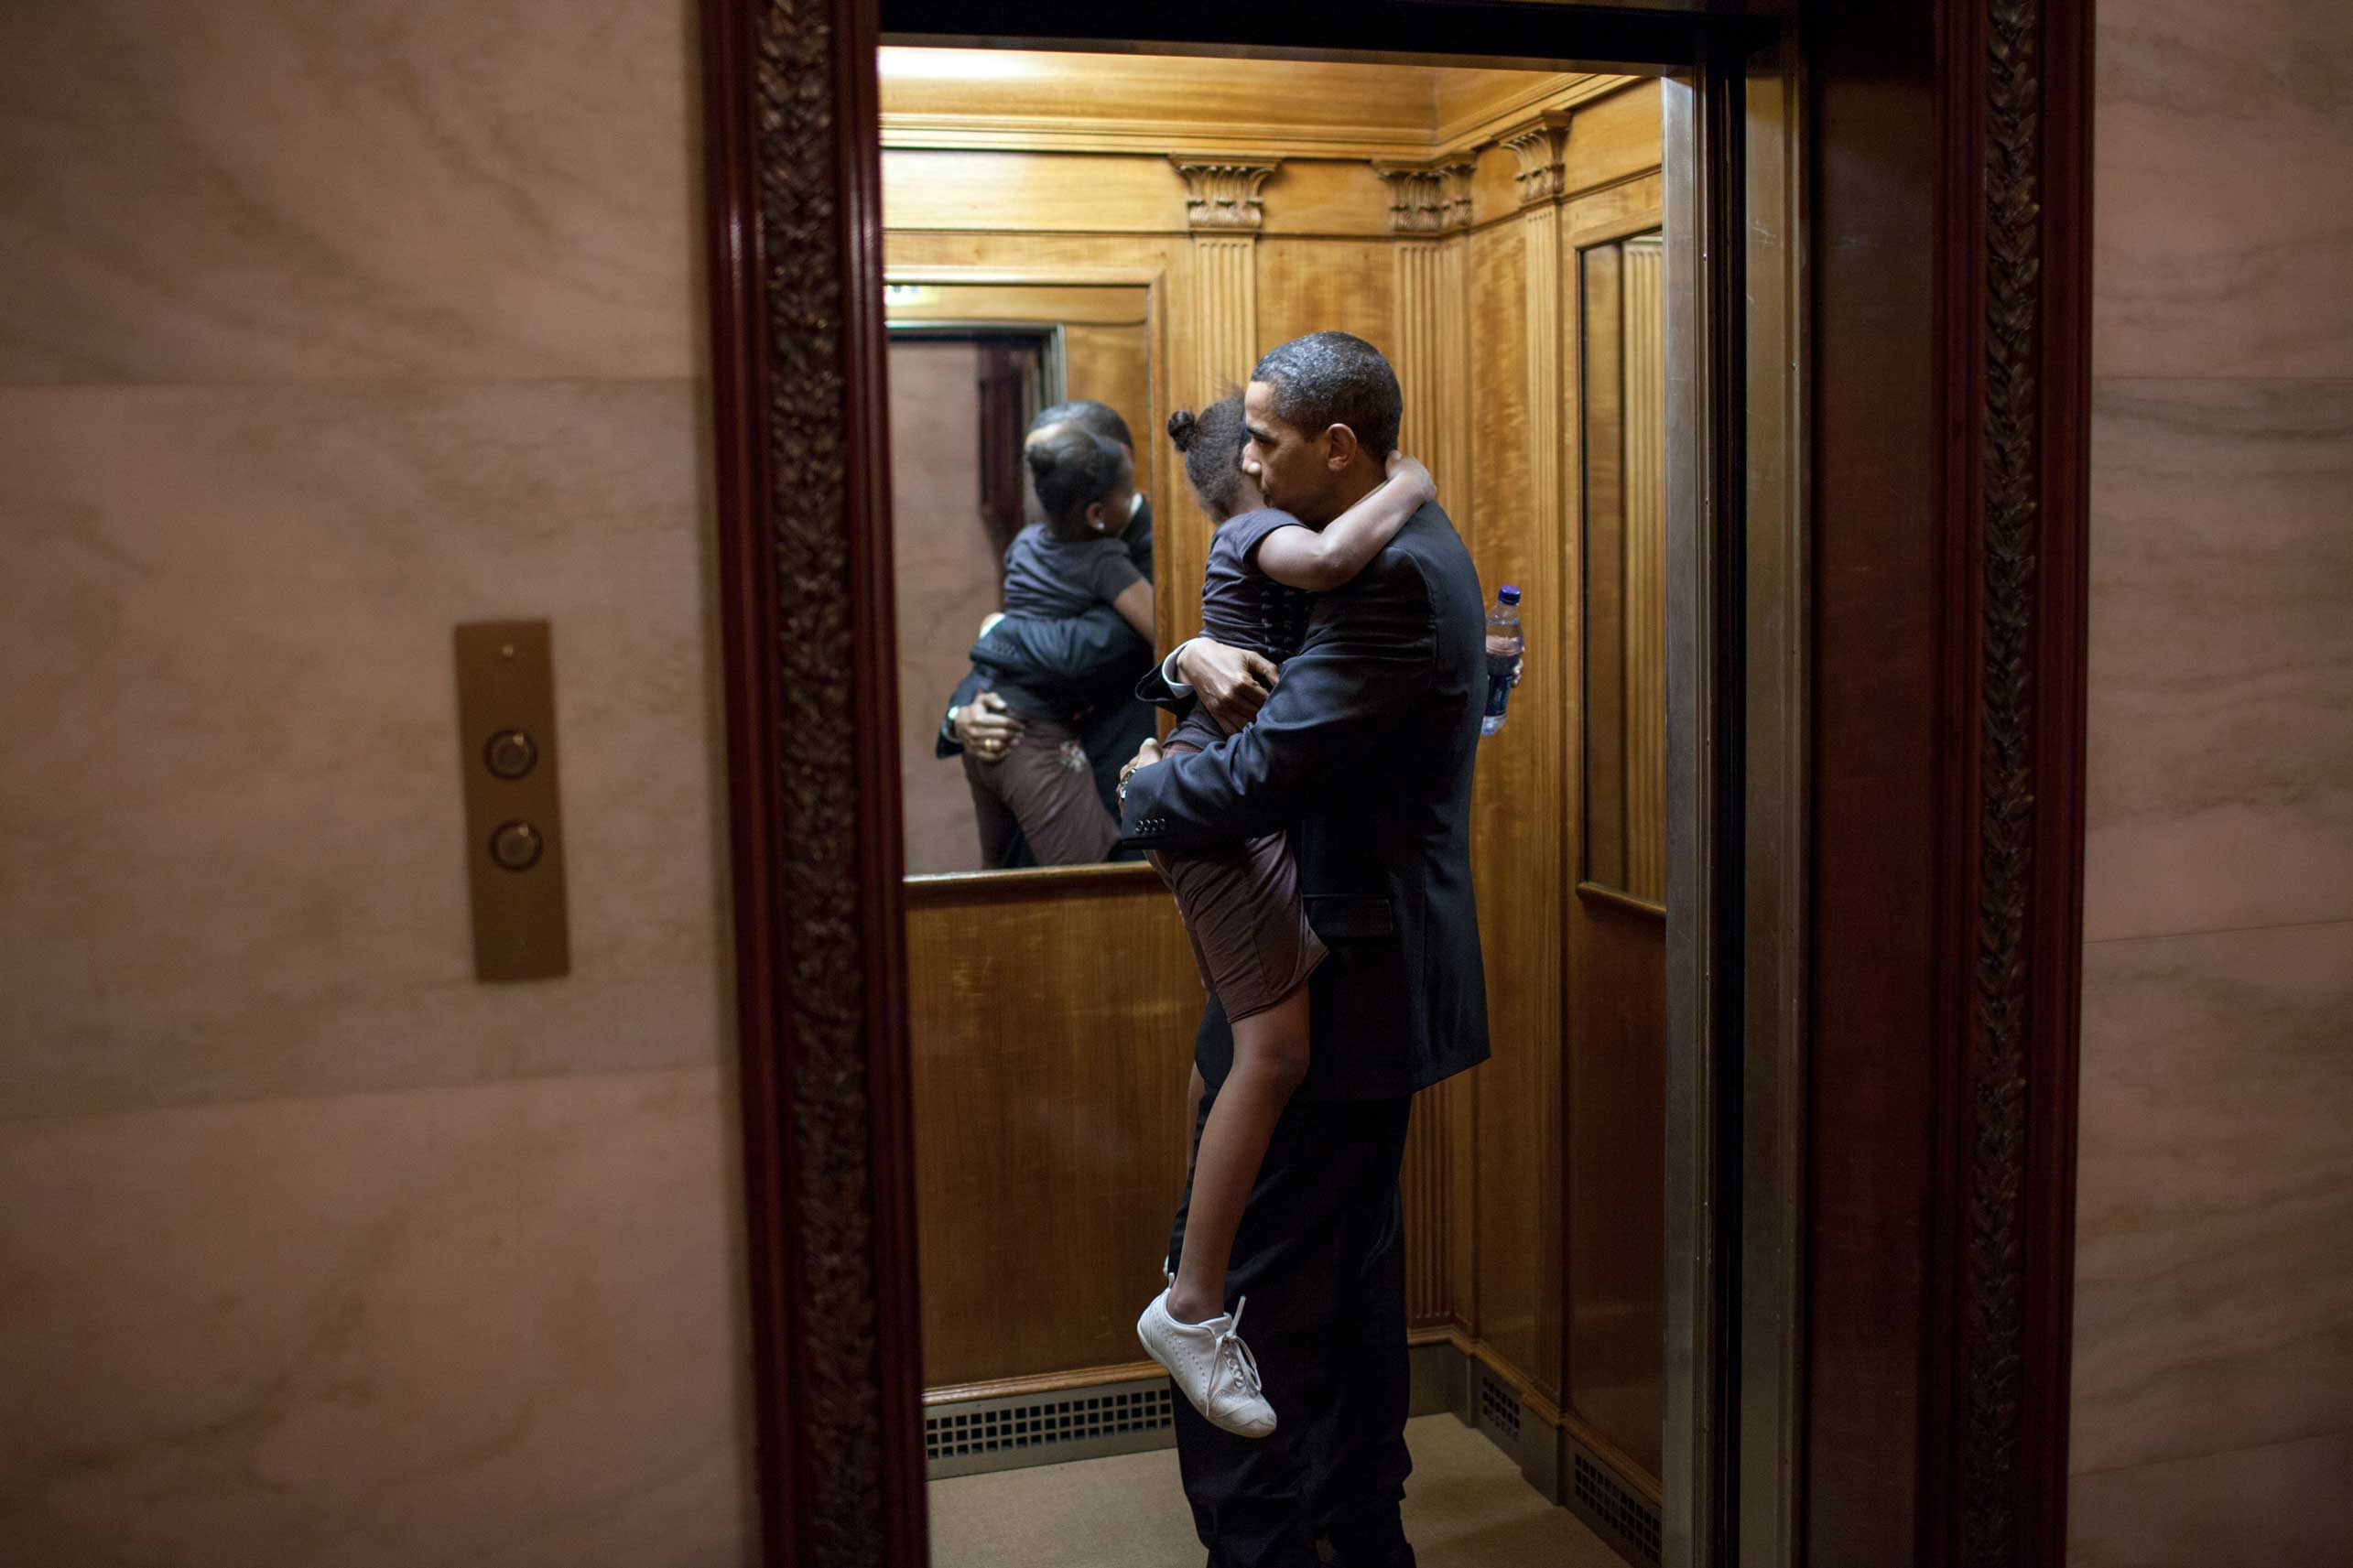 President Barack Obama was leaving the State Floor after an event and found Sasha in the elevator ready to head upstairs to the private residence. He decided to ride upstairs with her before returning to the Oval Office, on May 19, 2009.